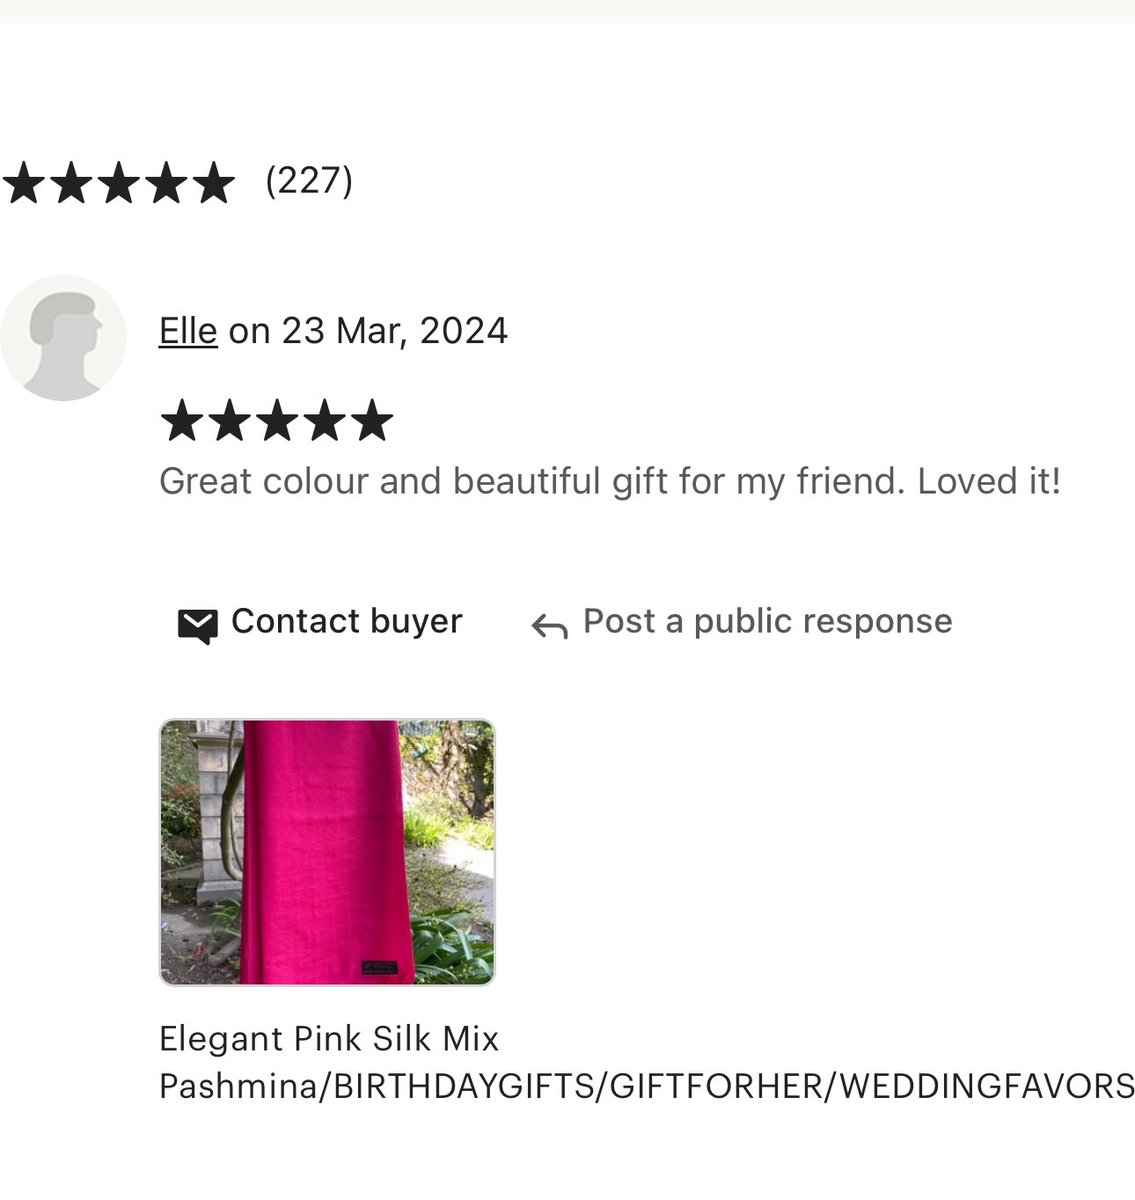 Thank you for the beautiful review! Silk mix pashmina! Silky soft and classically luxurious, this vibrant stole makes a perfect gift or a wonderfully indulgent treat for yourself! #gifts #SustainableFashion #EcoFriendly #ecogifts #silk #birthdaygift #pashmina #etsyhandmade